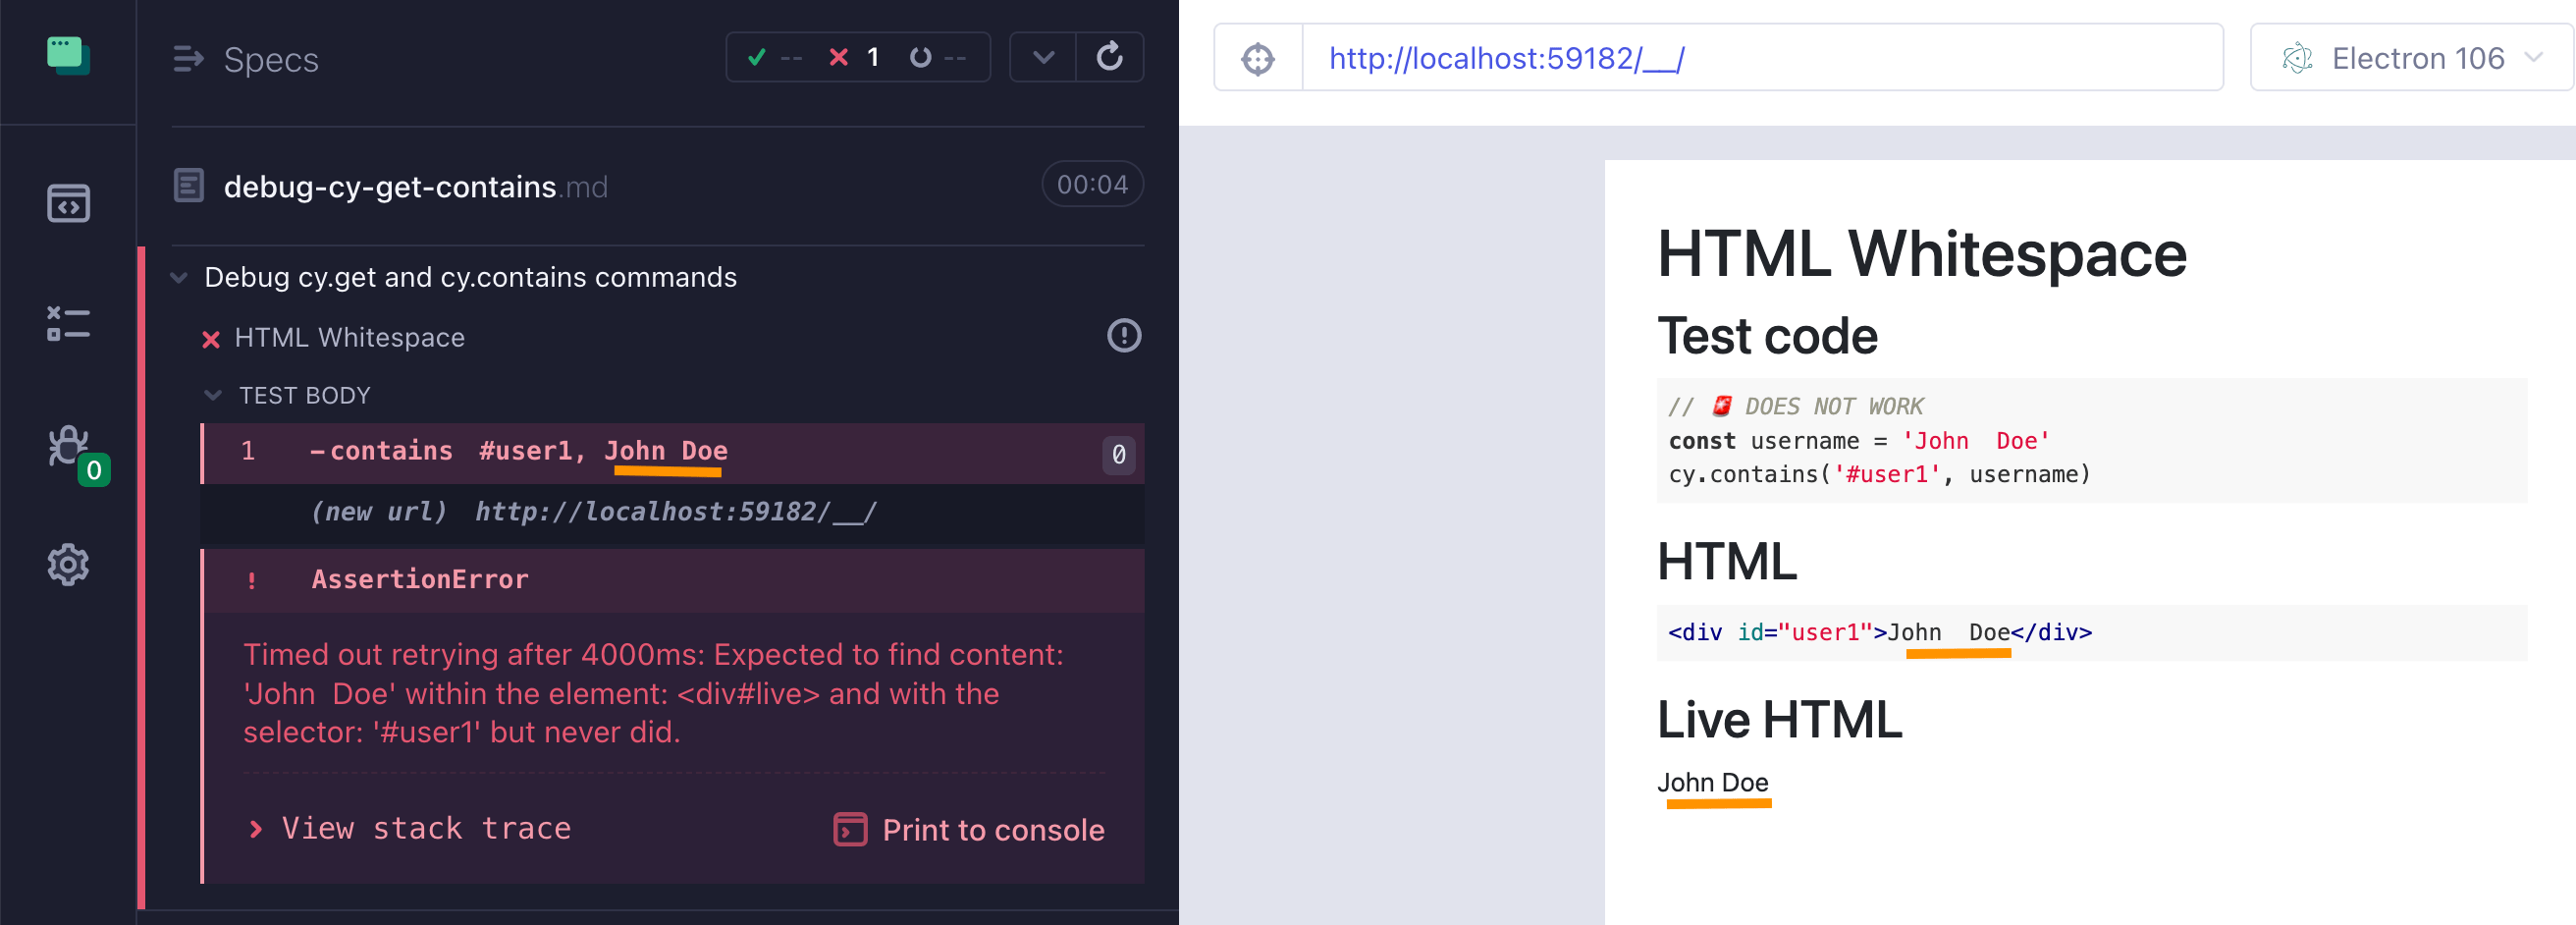 The test fails to find text when there are multiple spaces between words